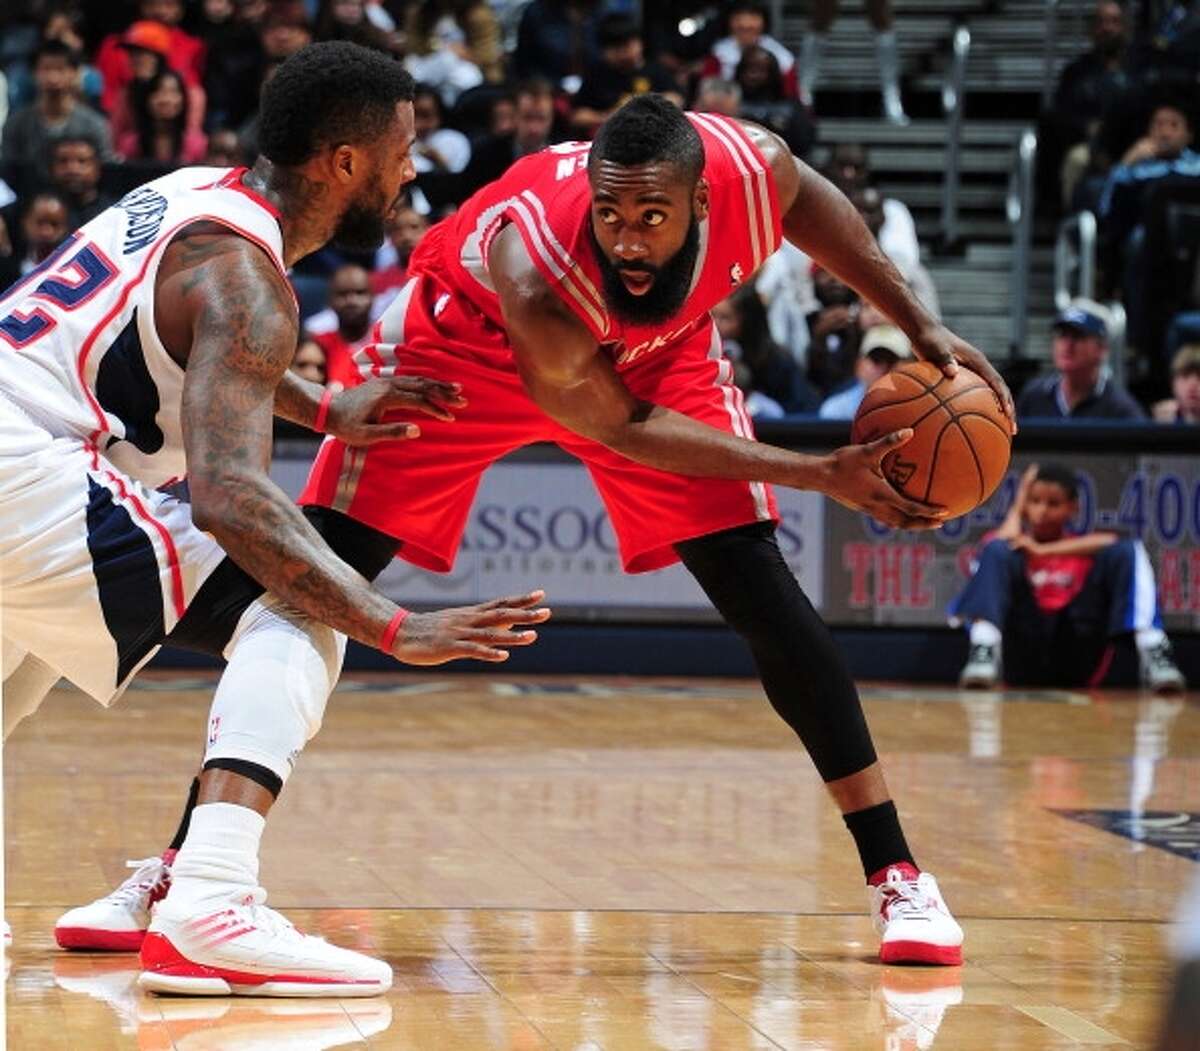 Second game twice as nice Harden followed up his stellar first game with a 45-point, seven-rebound effort in a 109-102 victory over the Hawks.